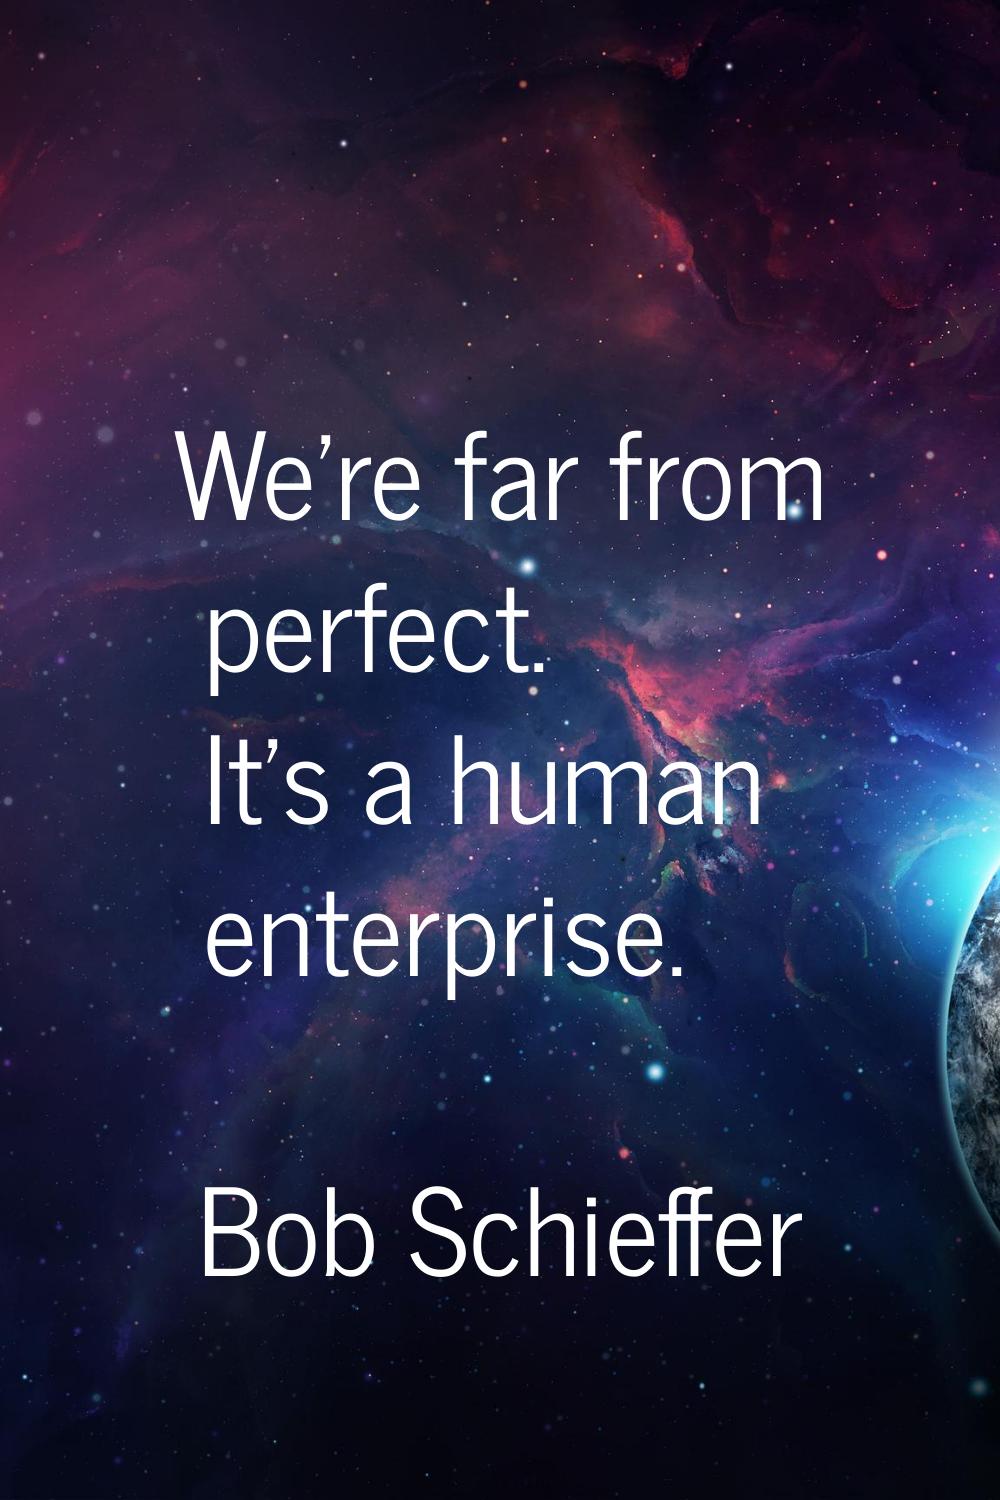 We're far from perfect. It's a human enterprise.